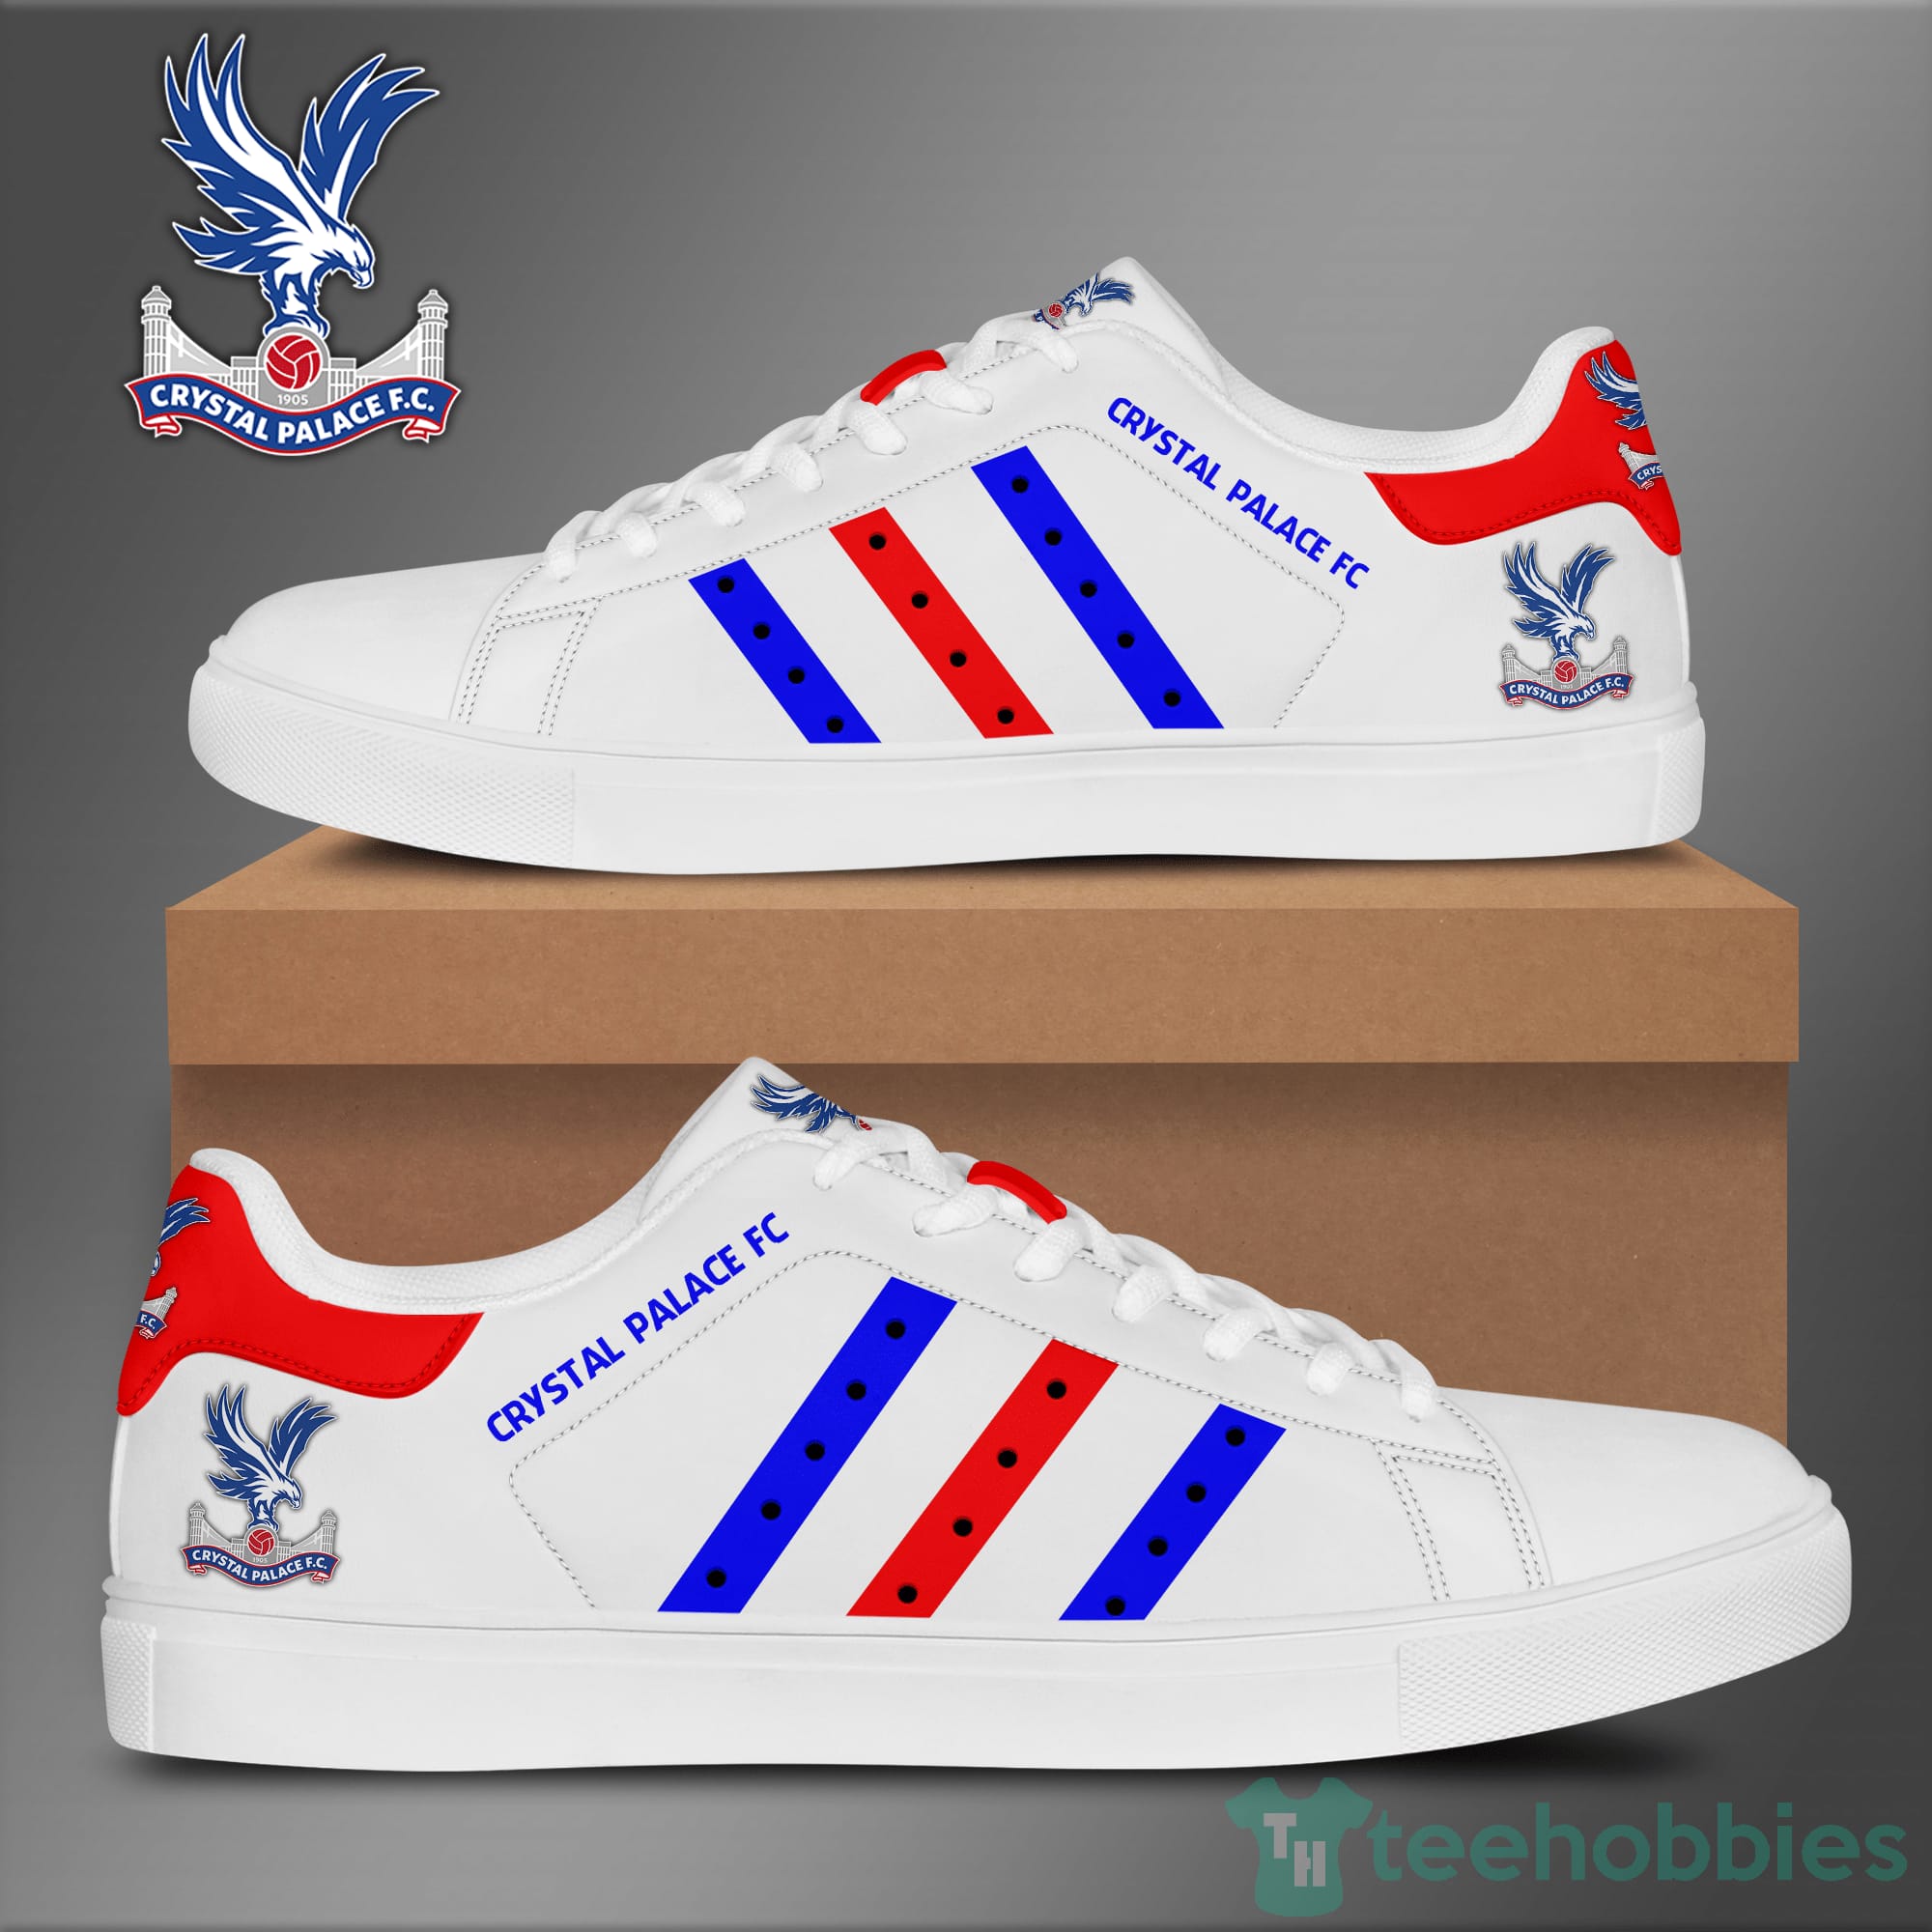 Crystal Palace Fc White Low Top Skate Shoes Product photo 2